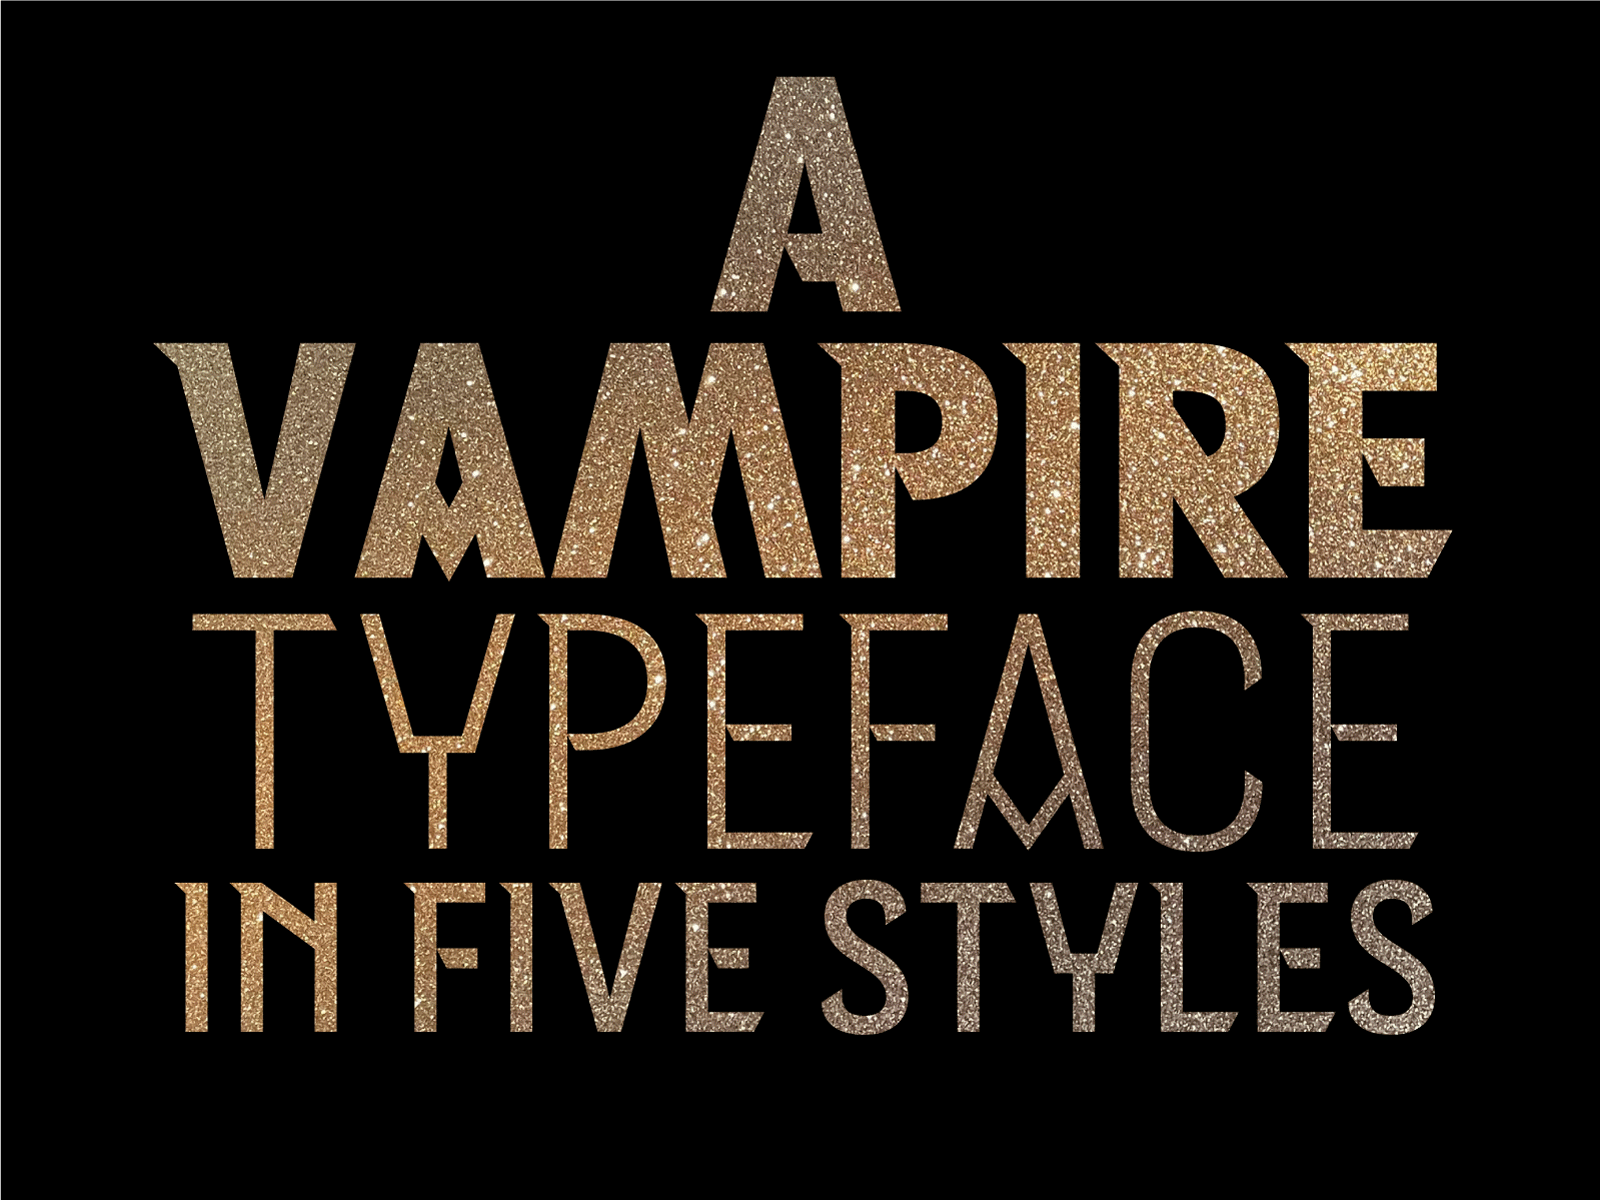 Immortal Gothic LK Sans and Serif amc custom type design font glyph interview with the vampire serif type design typeface typeface design